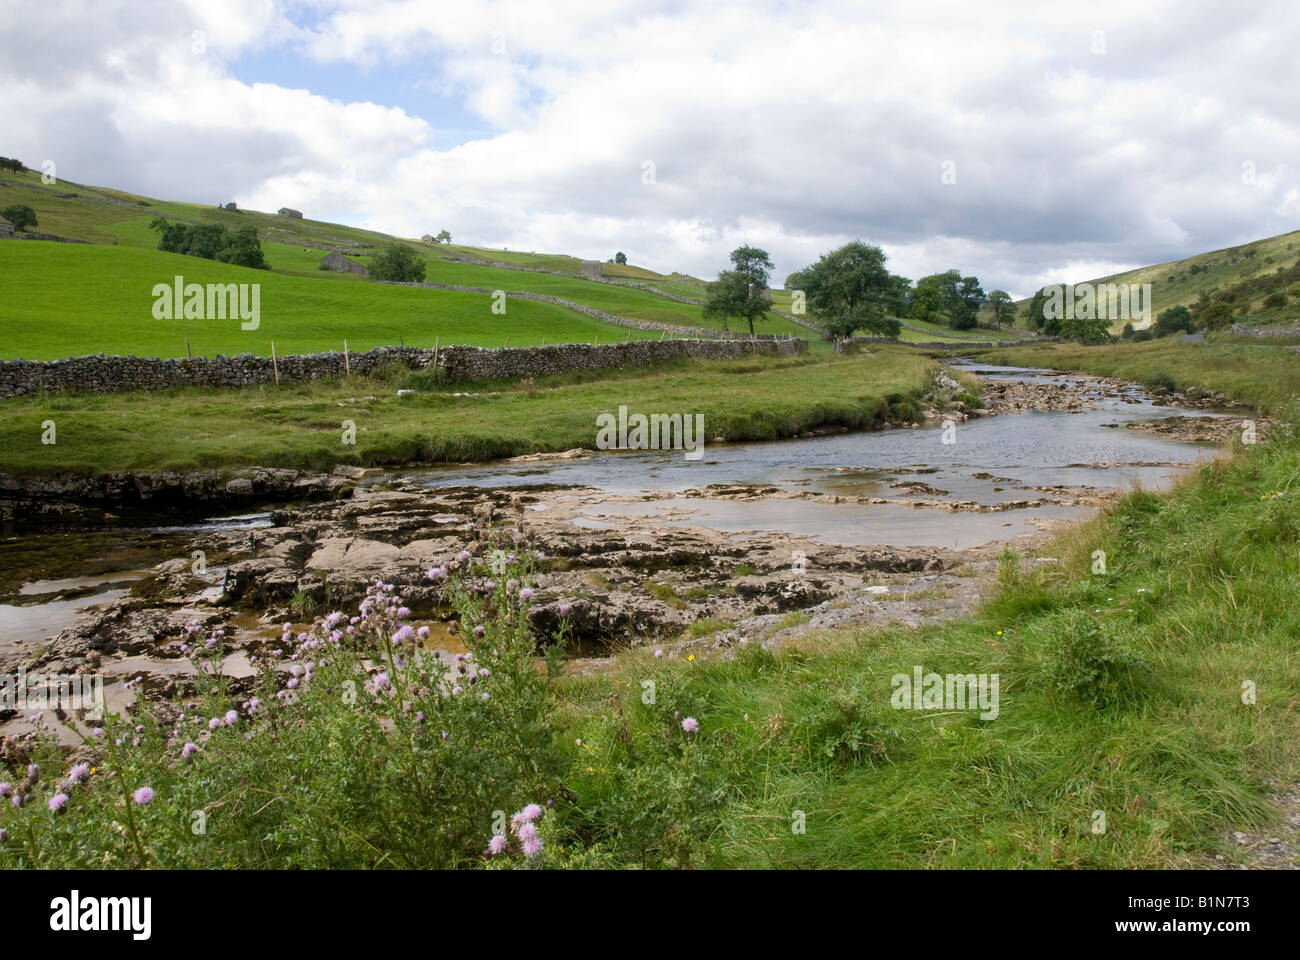 River Wharfe, Stone barns, walls and fields, Langstrothdale Chase, Yorkshire Dales National Park Stock Photo